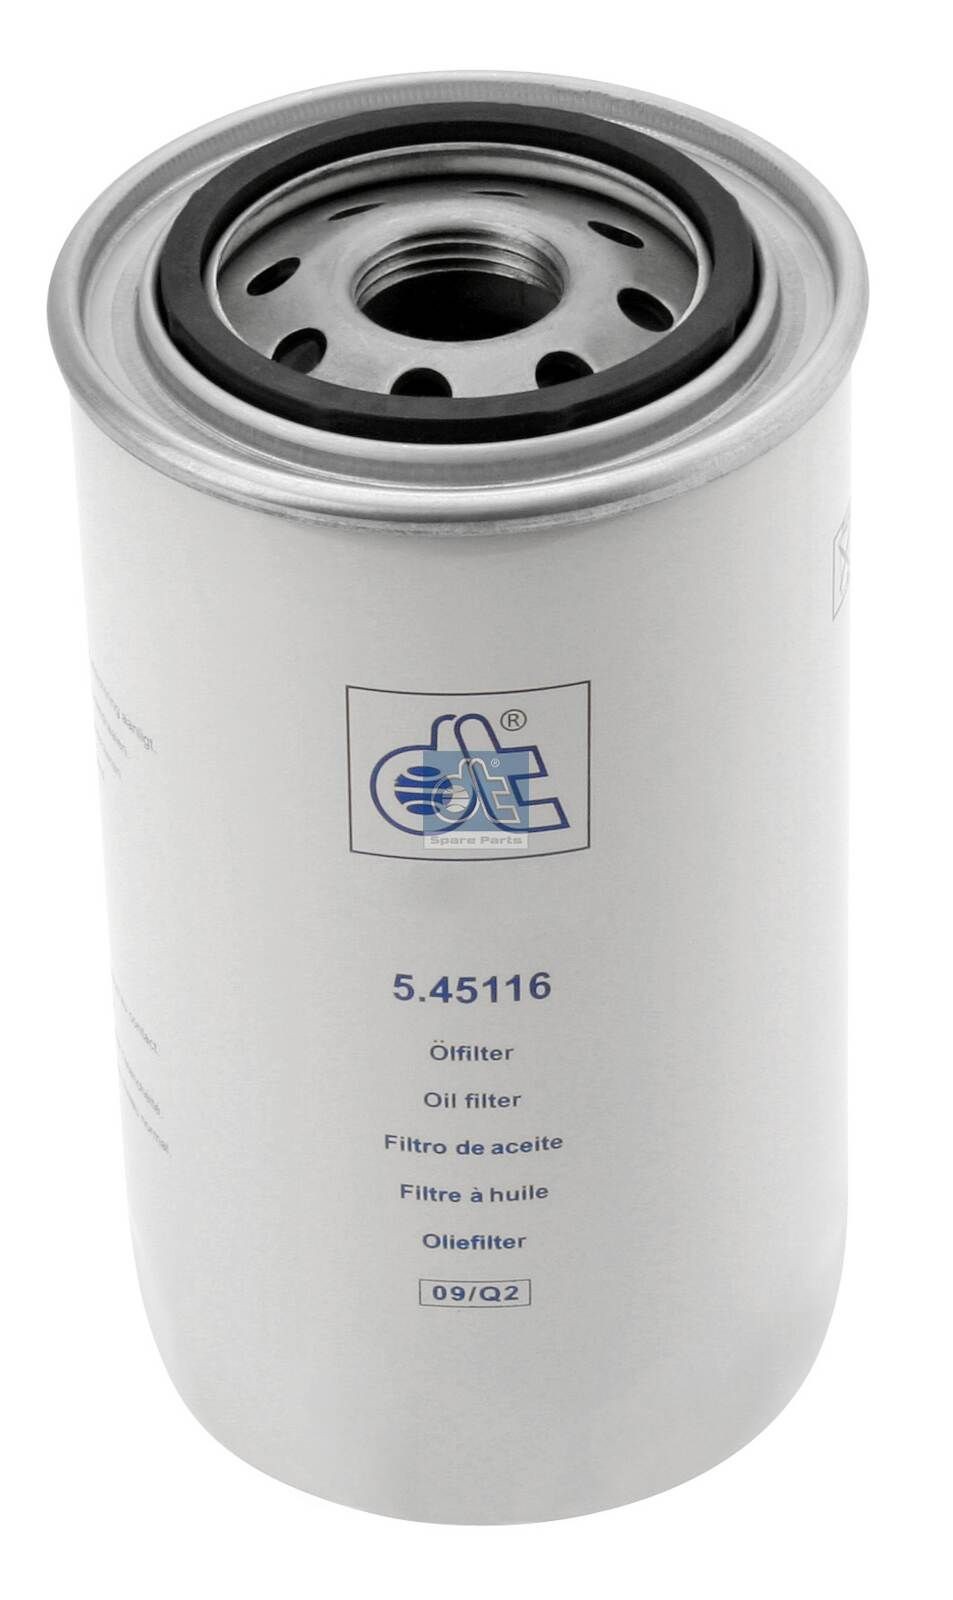 H19W10 DT Spare Parts 5.45116 Oil filter 1399 494